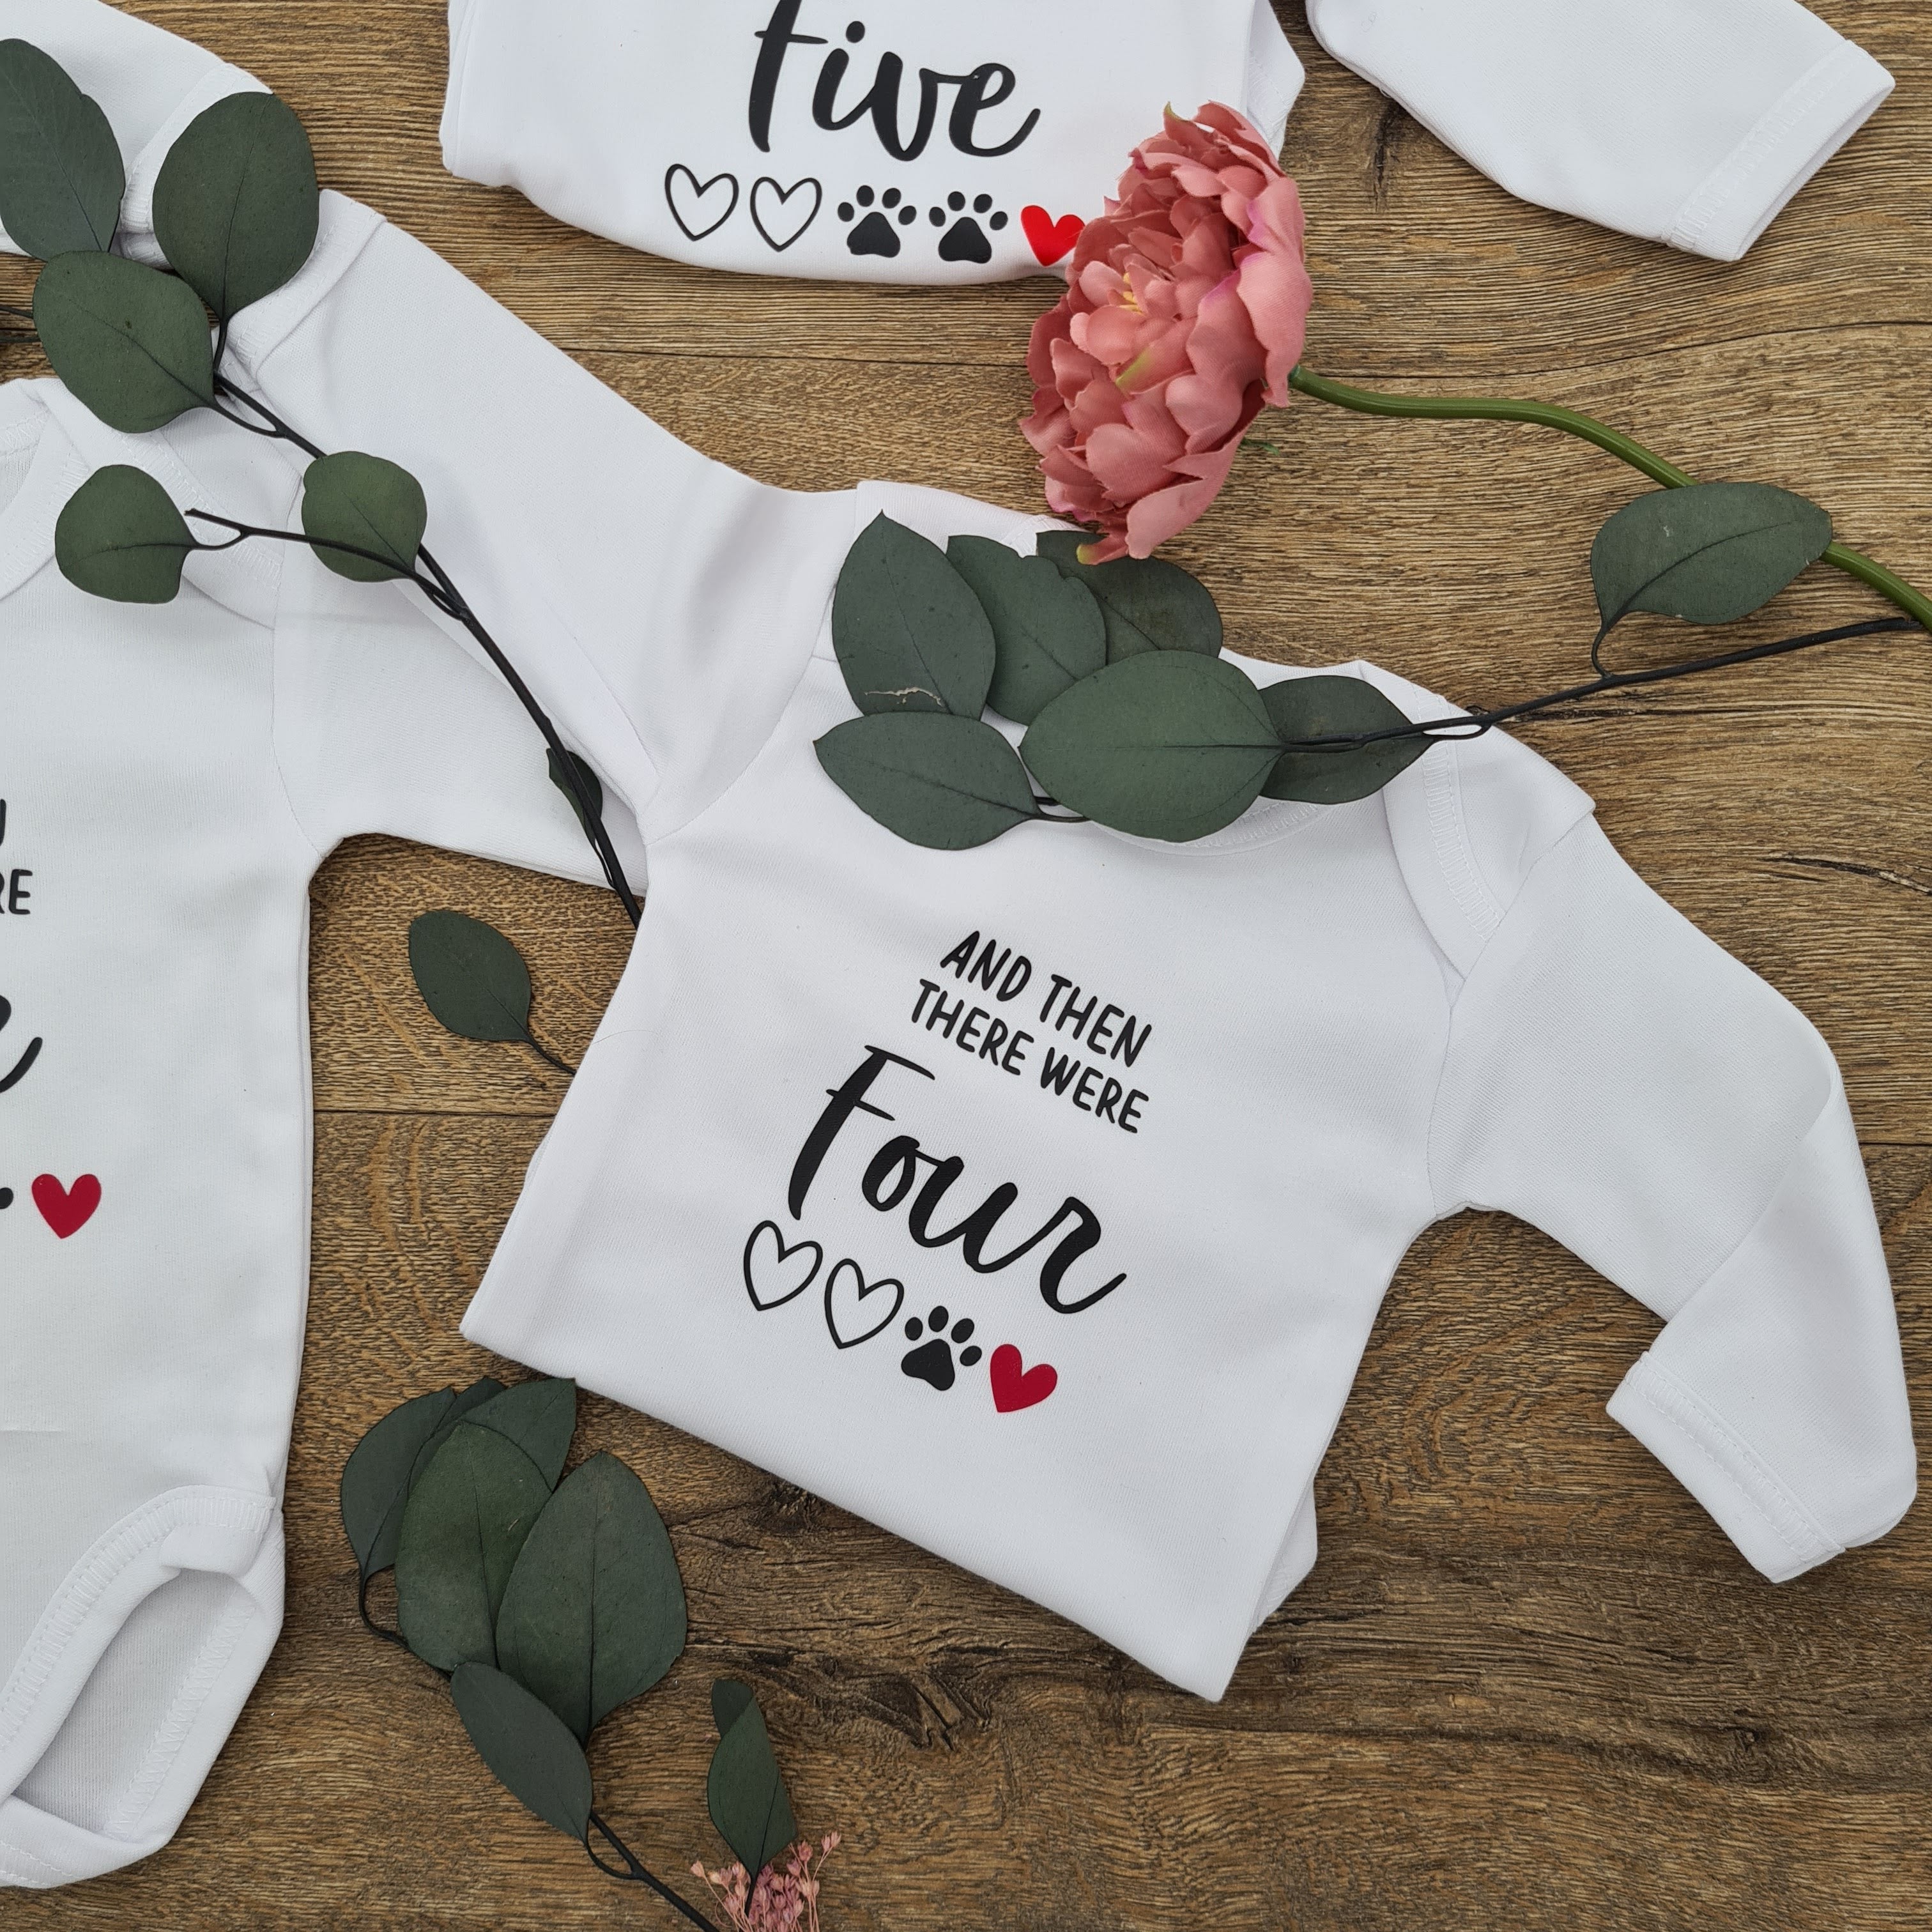 Pregnancy Announcement Onesie - "And then there were Four (4)"